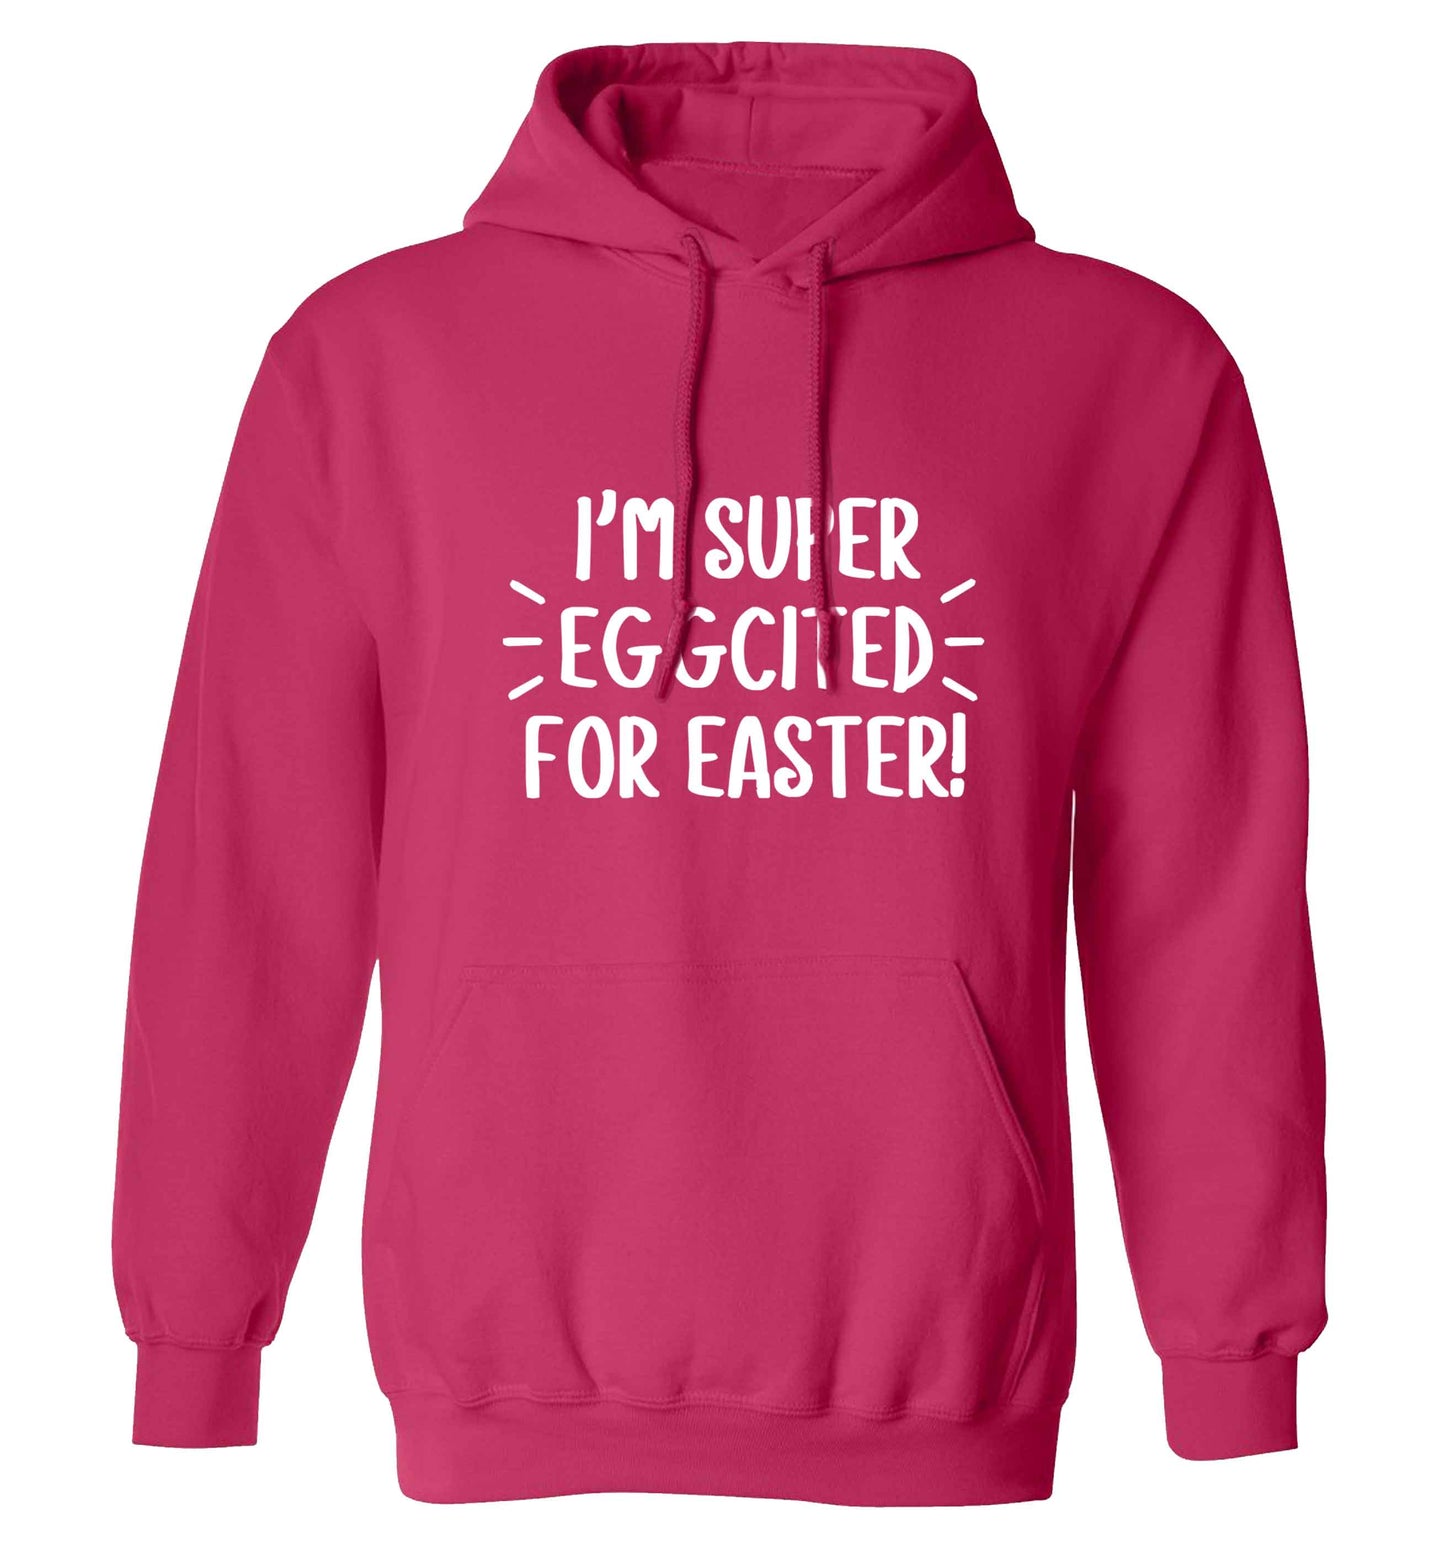 I'm super eggcited for Easter adults unisex pink hoodie 2XL